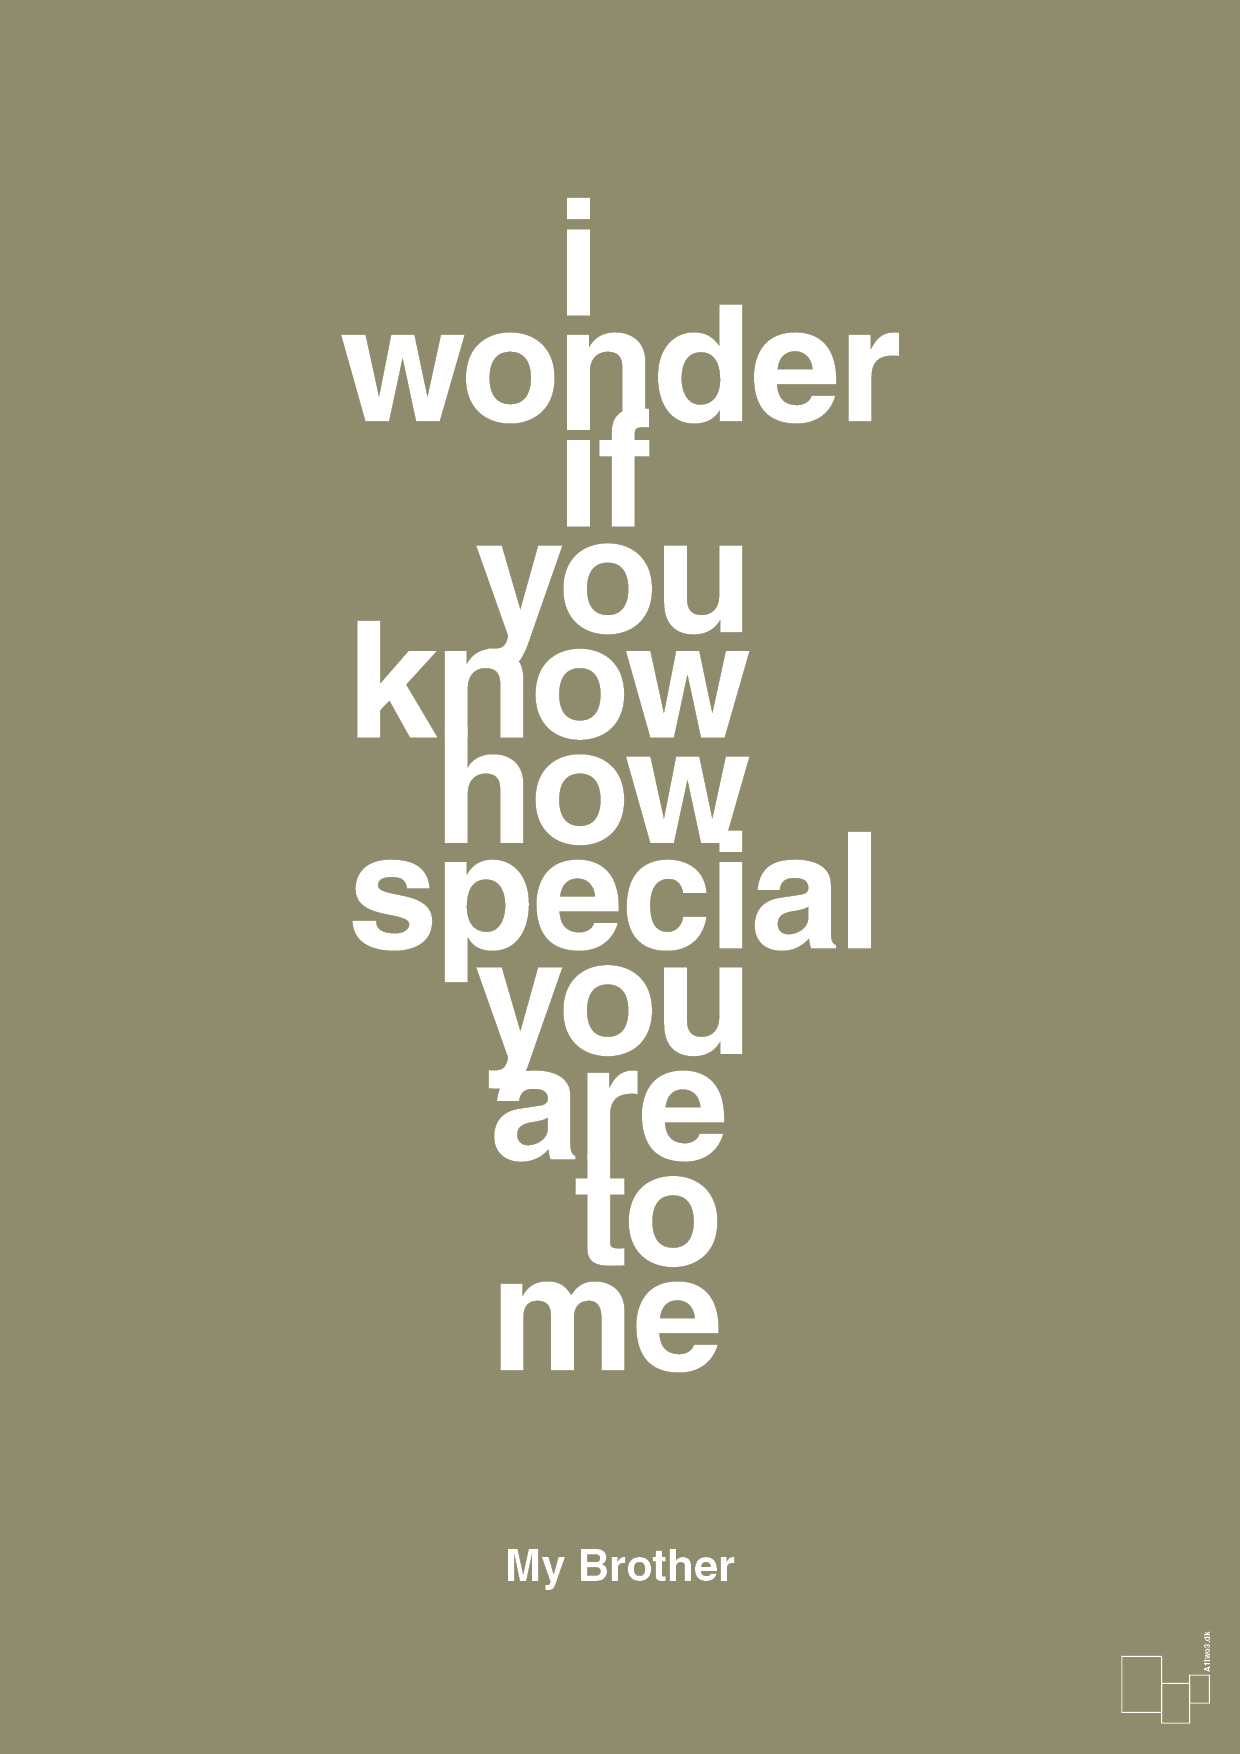 my brother - i wonder if you know how special you are to me - Plakat med Citater i Misty Forrest